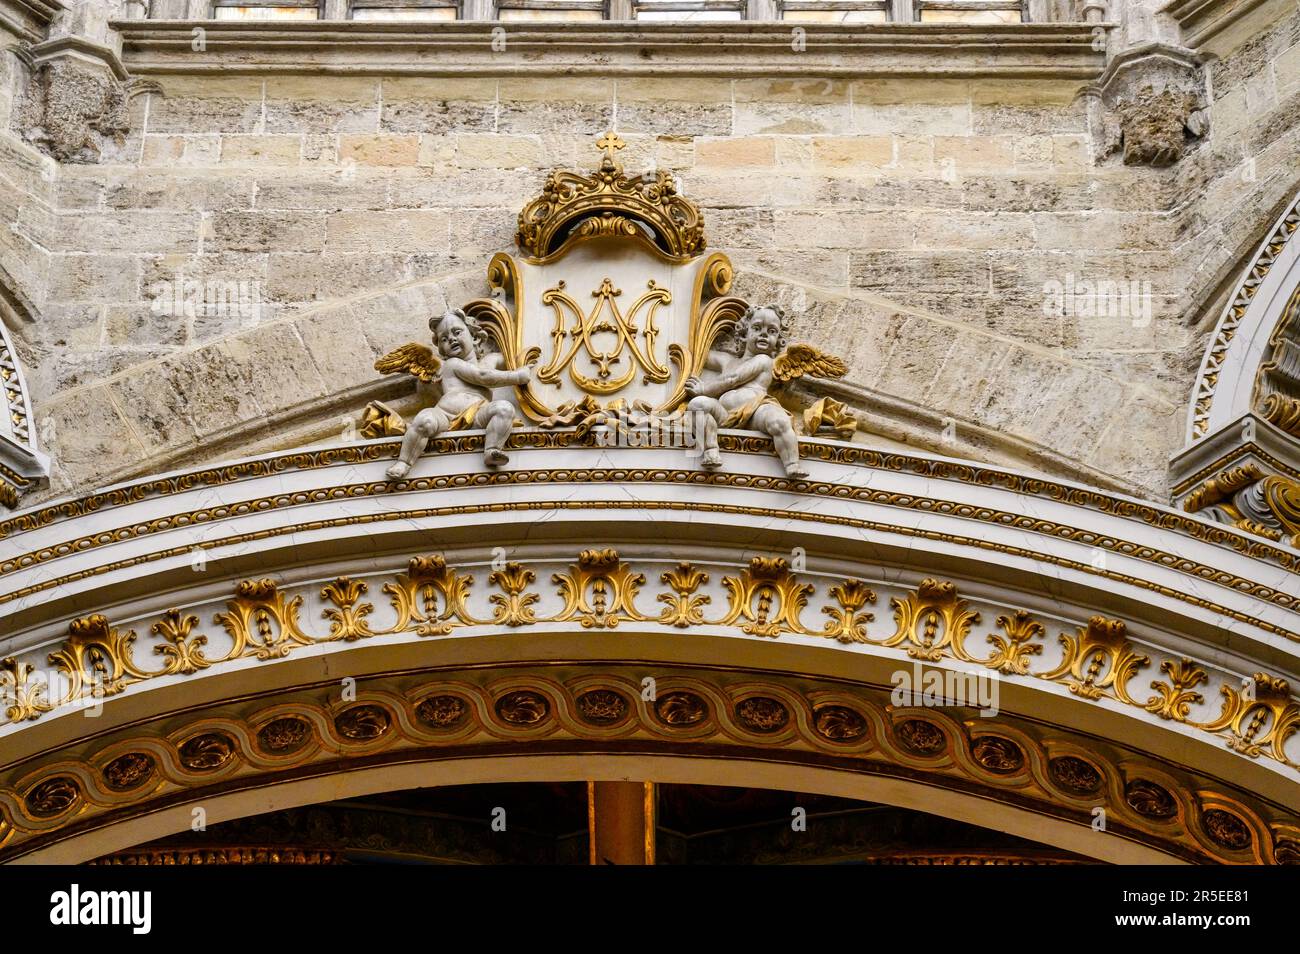 Valencia, Spain - July 17, 2022: Decoration on top of a door. Interior architectural features in the Metropolitan Cathedral–Basilica of the Assumption Stock Photo